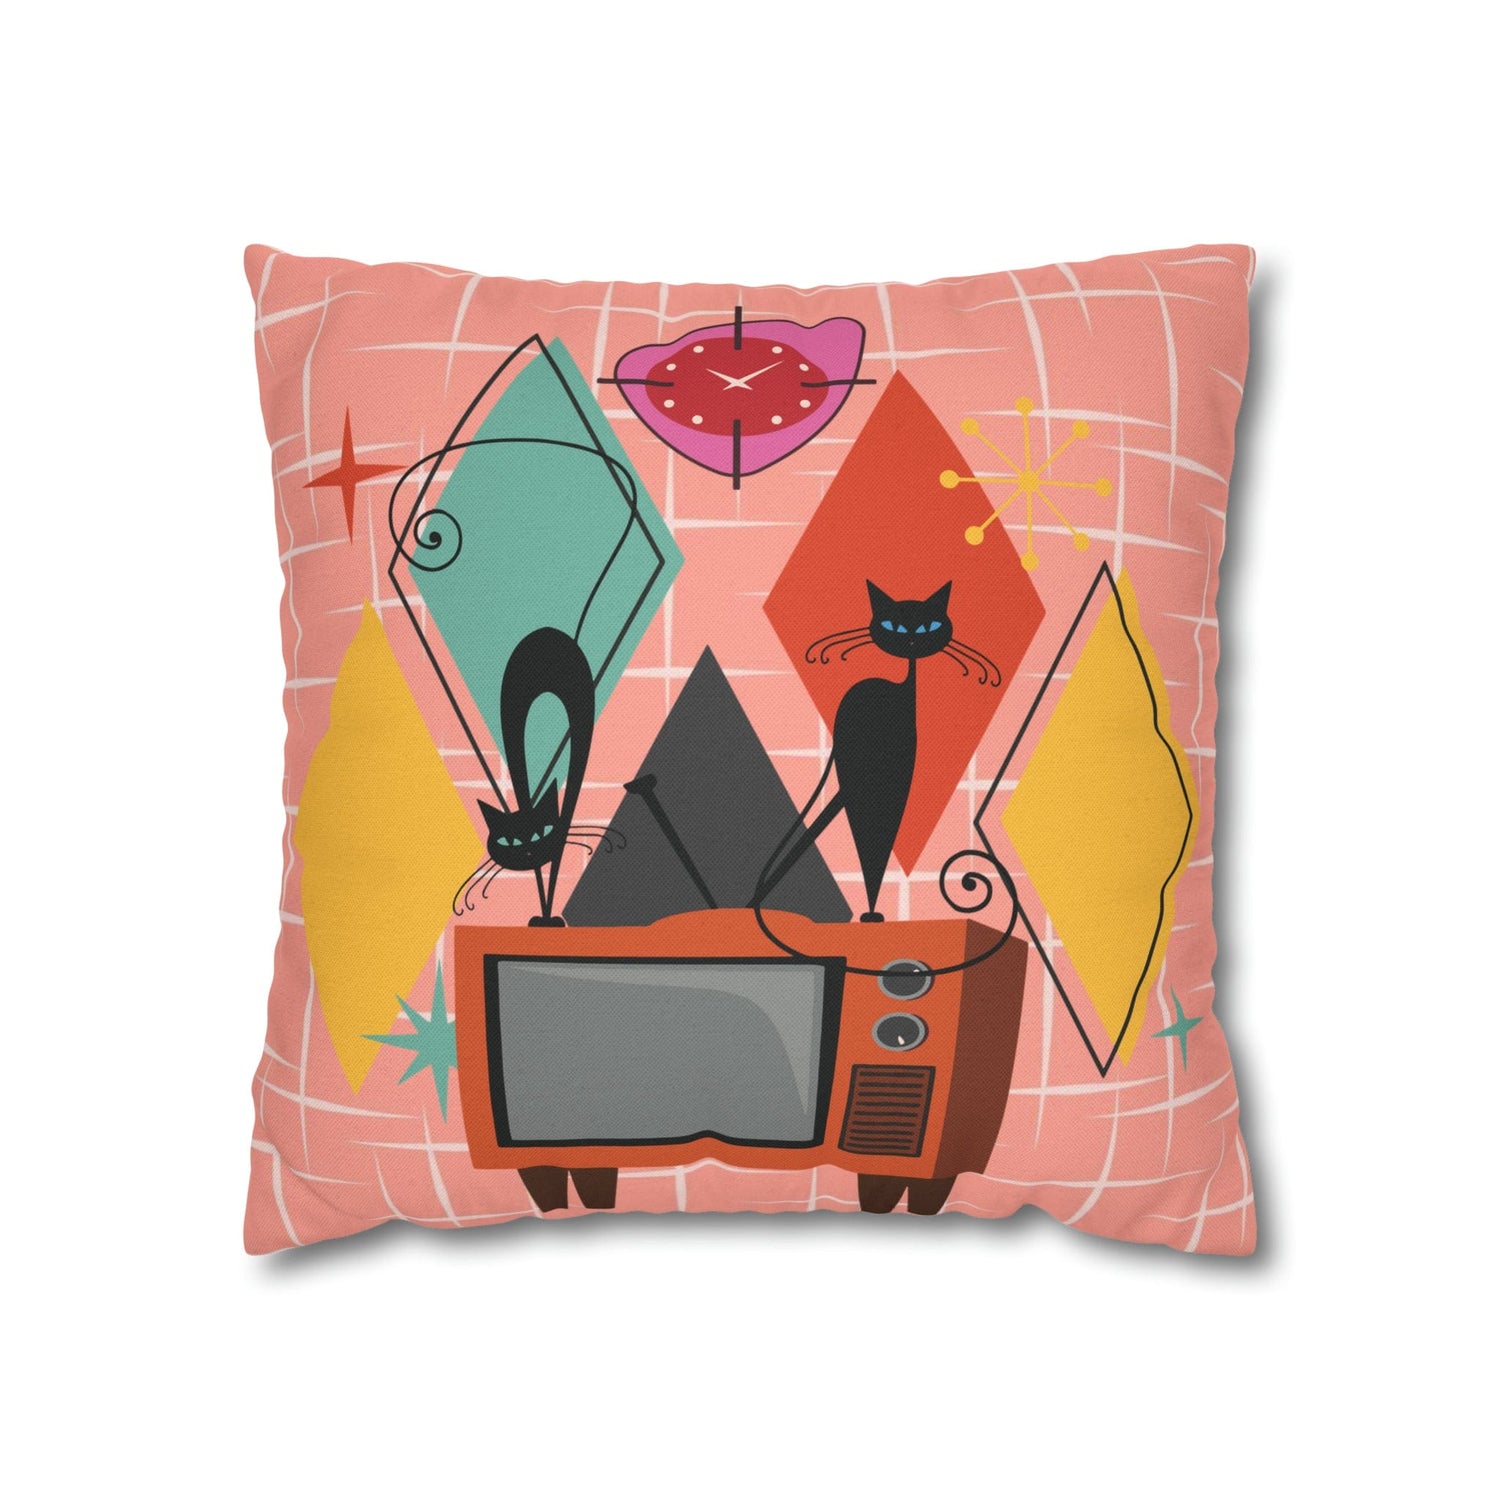 Kate McEnroe New York Atomic Cat Retro TV Pillow Cover, Mid Century Modern Orange, Teal, Yellow, Pink Cushion Covers, MCM Pillow Case Throw Pillow Covers 16&quot; × 16&quot; 16222089172191532282